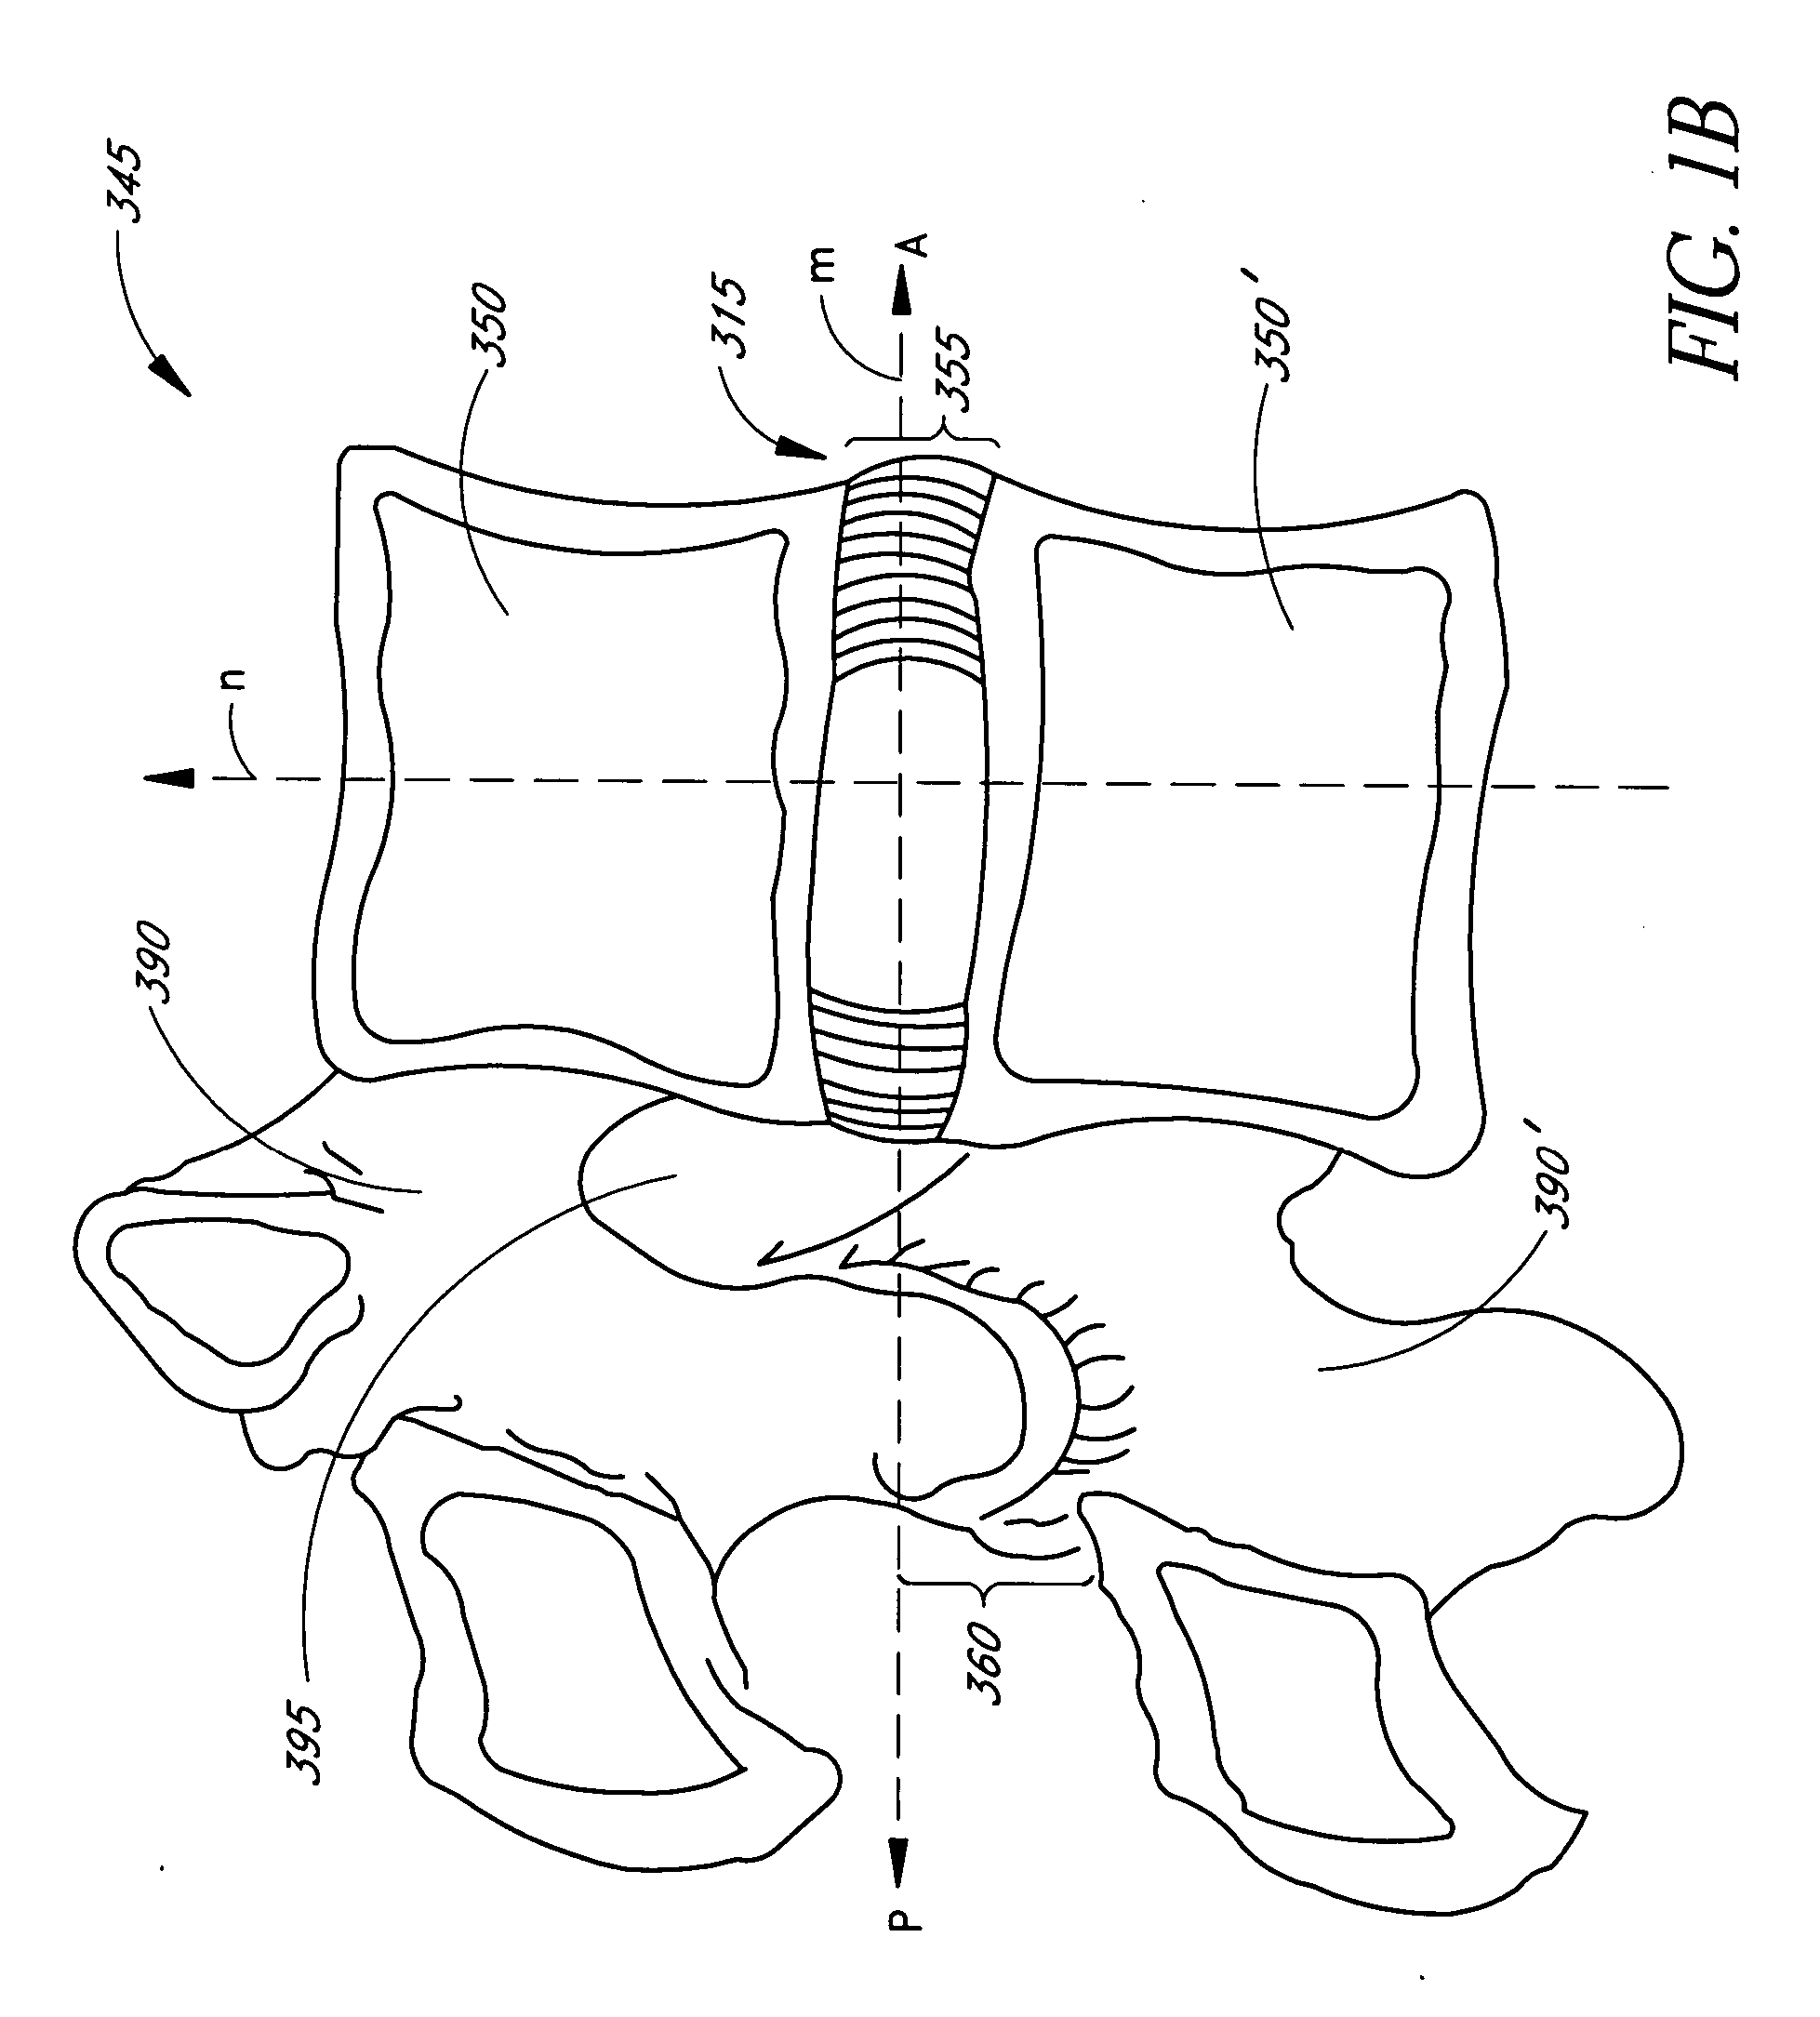 Minimally invasive method for delivery and positioning of intervertebral disc implants